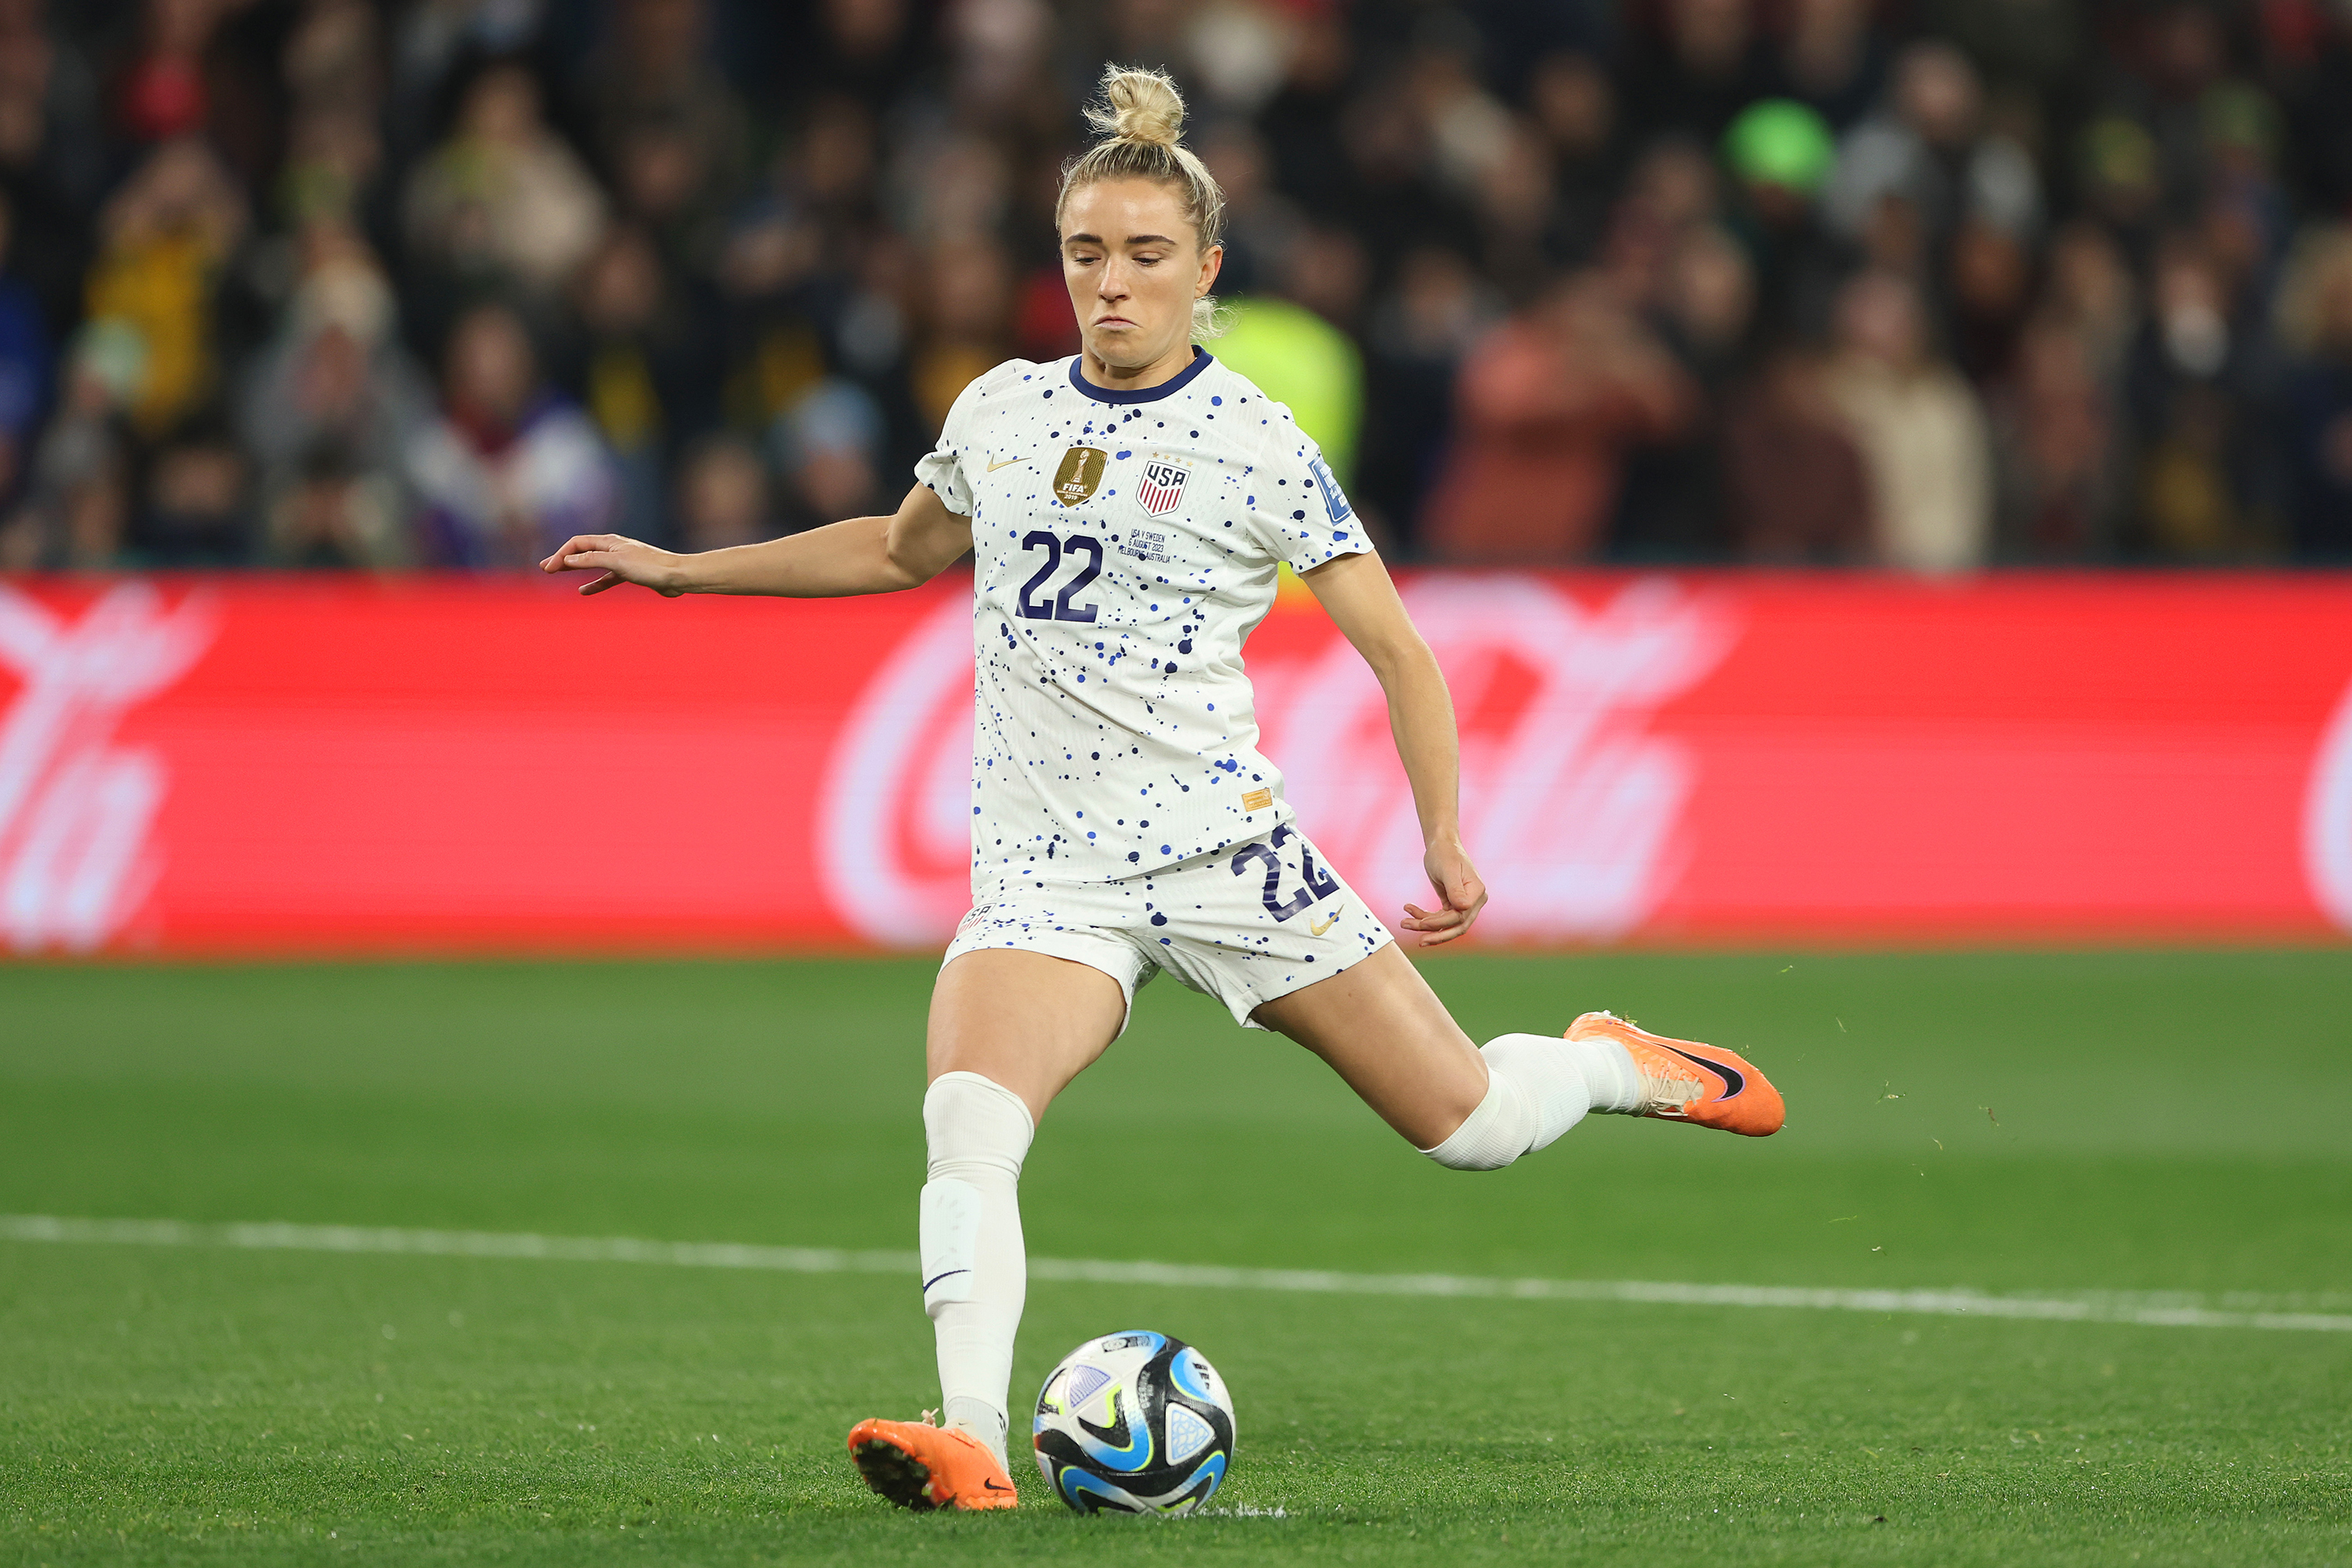 How Kristie Mewis found out she was on the U.S. World Cup roster